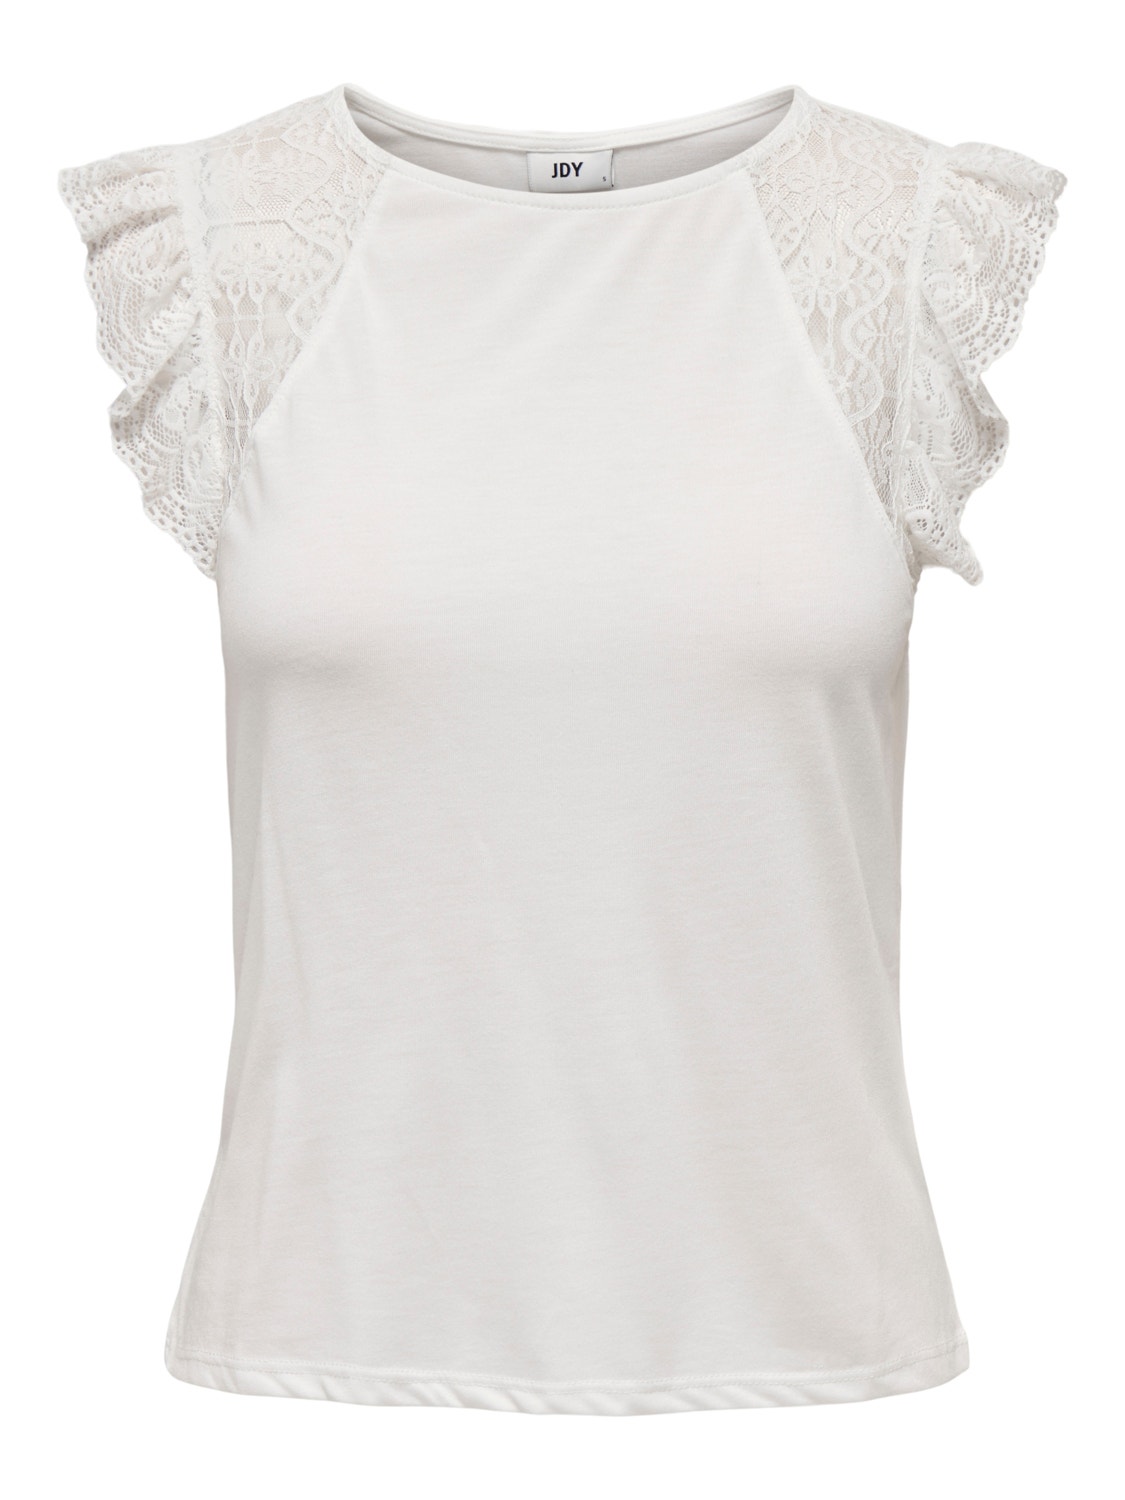 ONLY Top with lace and frills -Cloud Dancer - 15297387